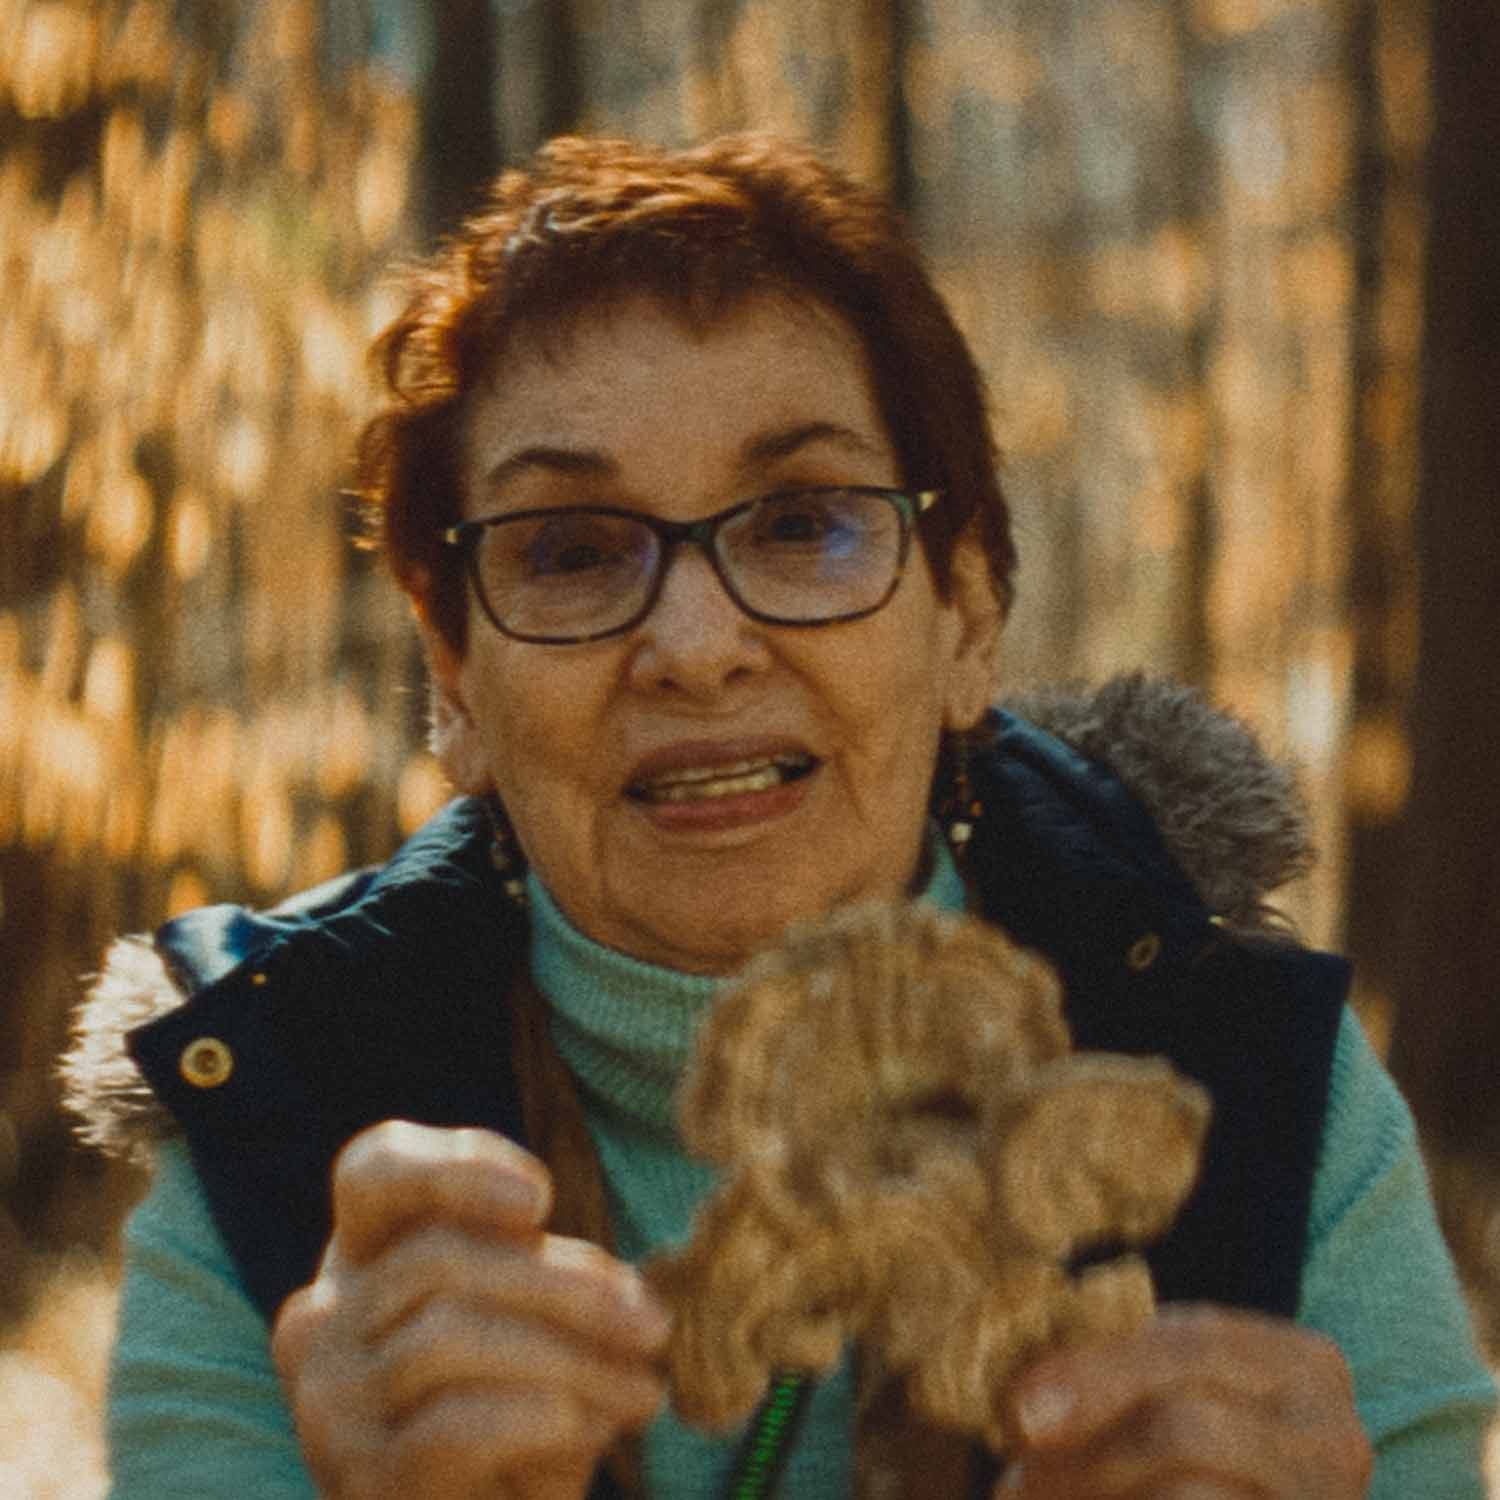 A woman holding out a freshly harvested mushroom